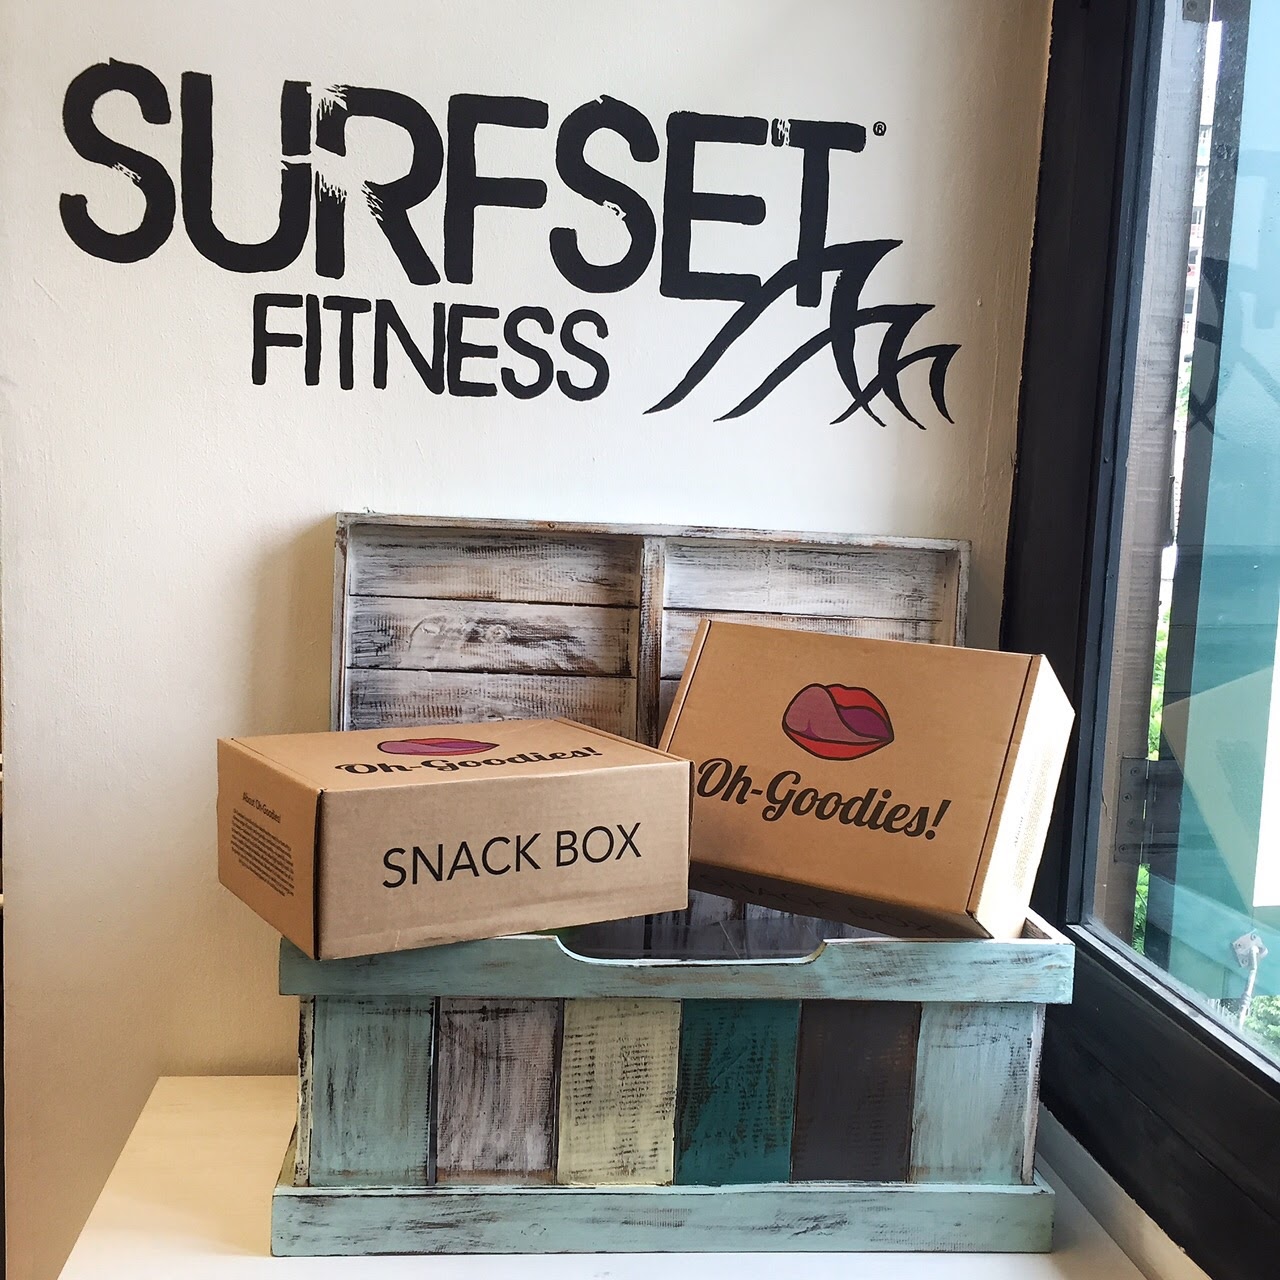 Madereal snack box in Surfset Fitness oh-goodies